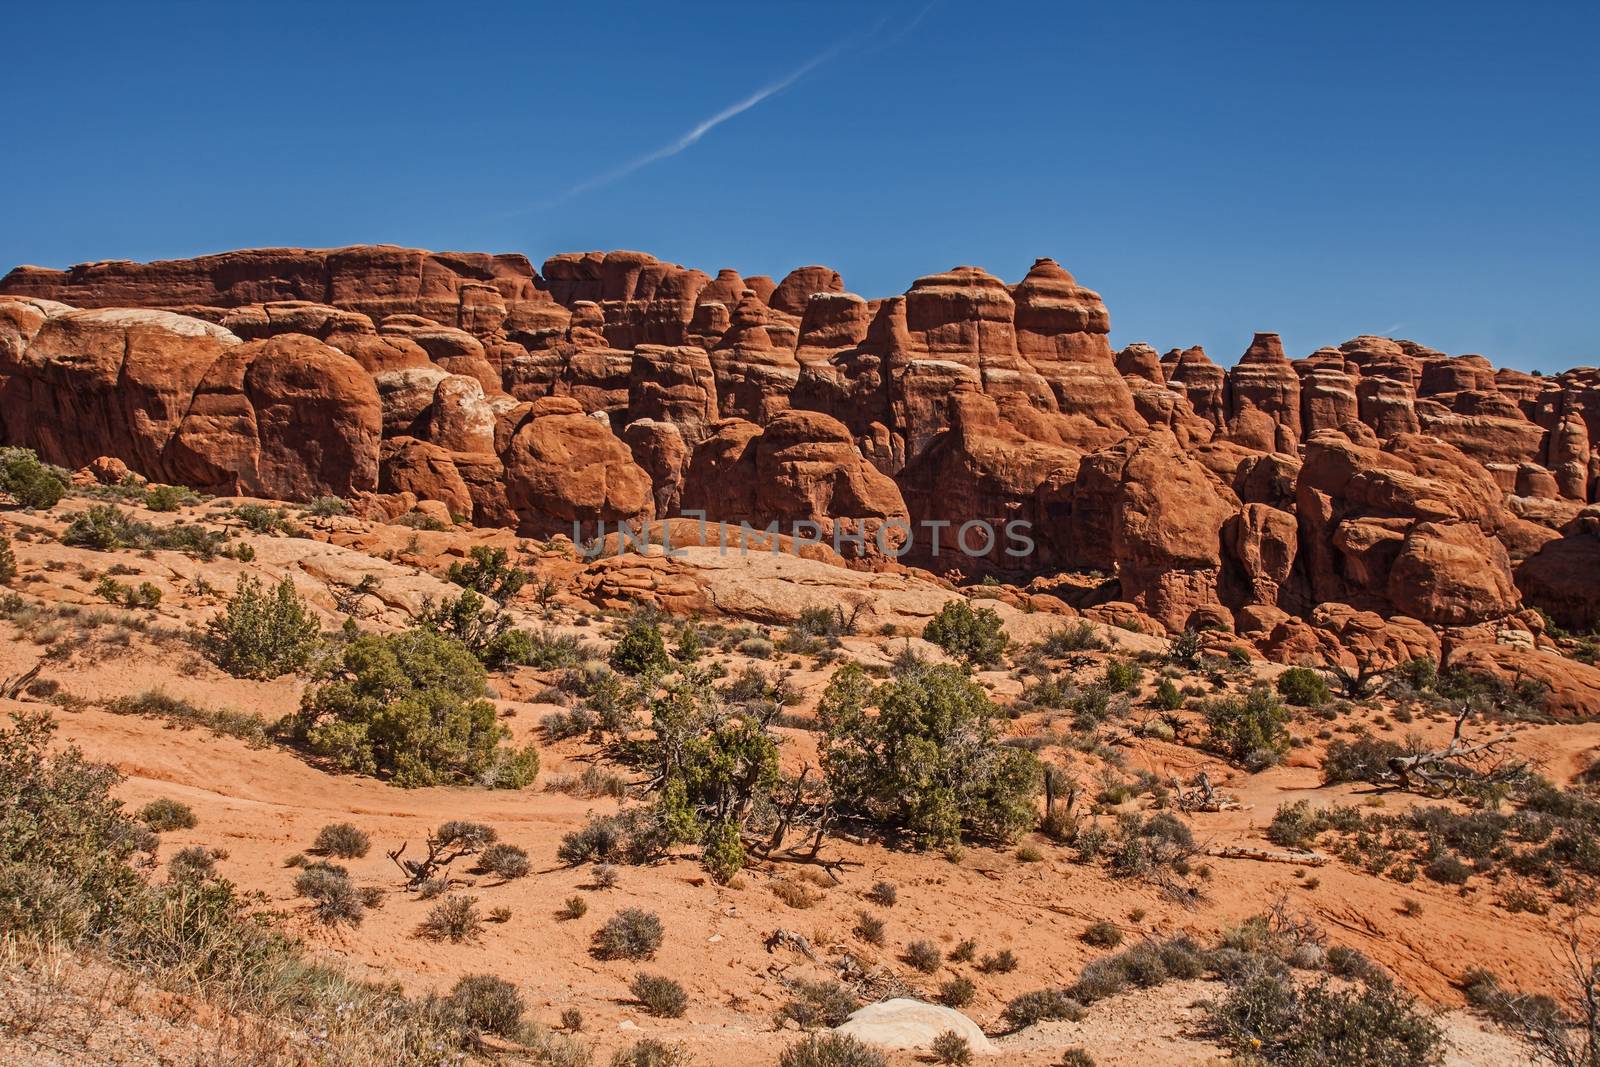 The foreboding rock formations of  Devil's Garden in Arches National Park Utah